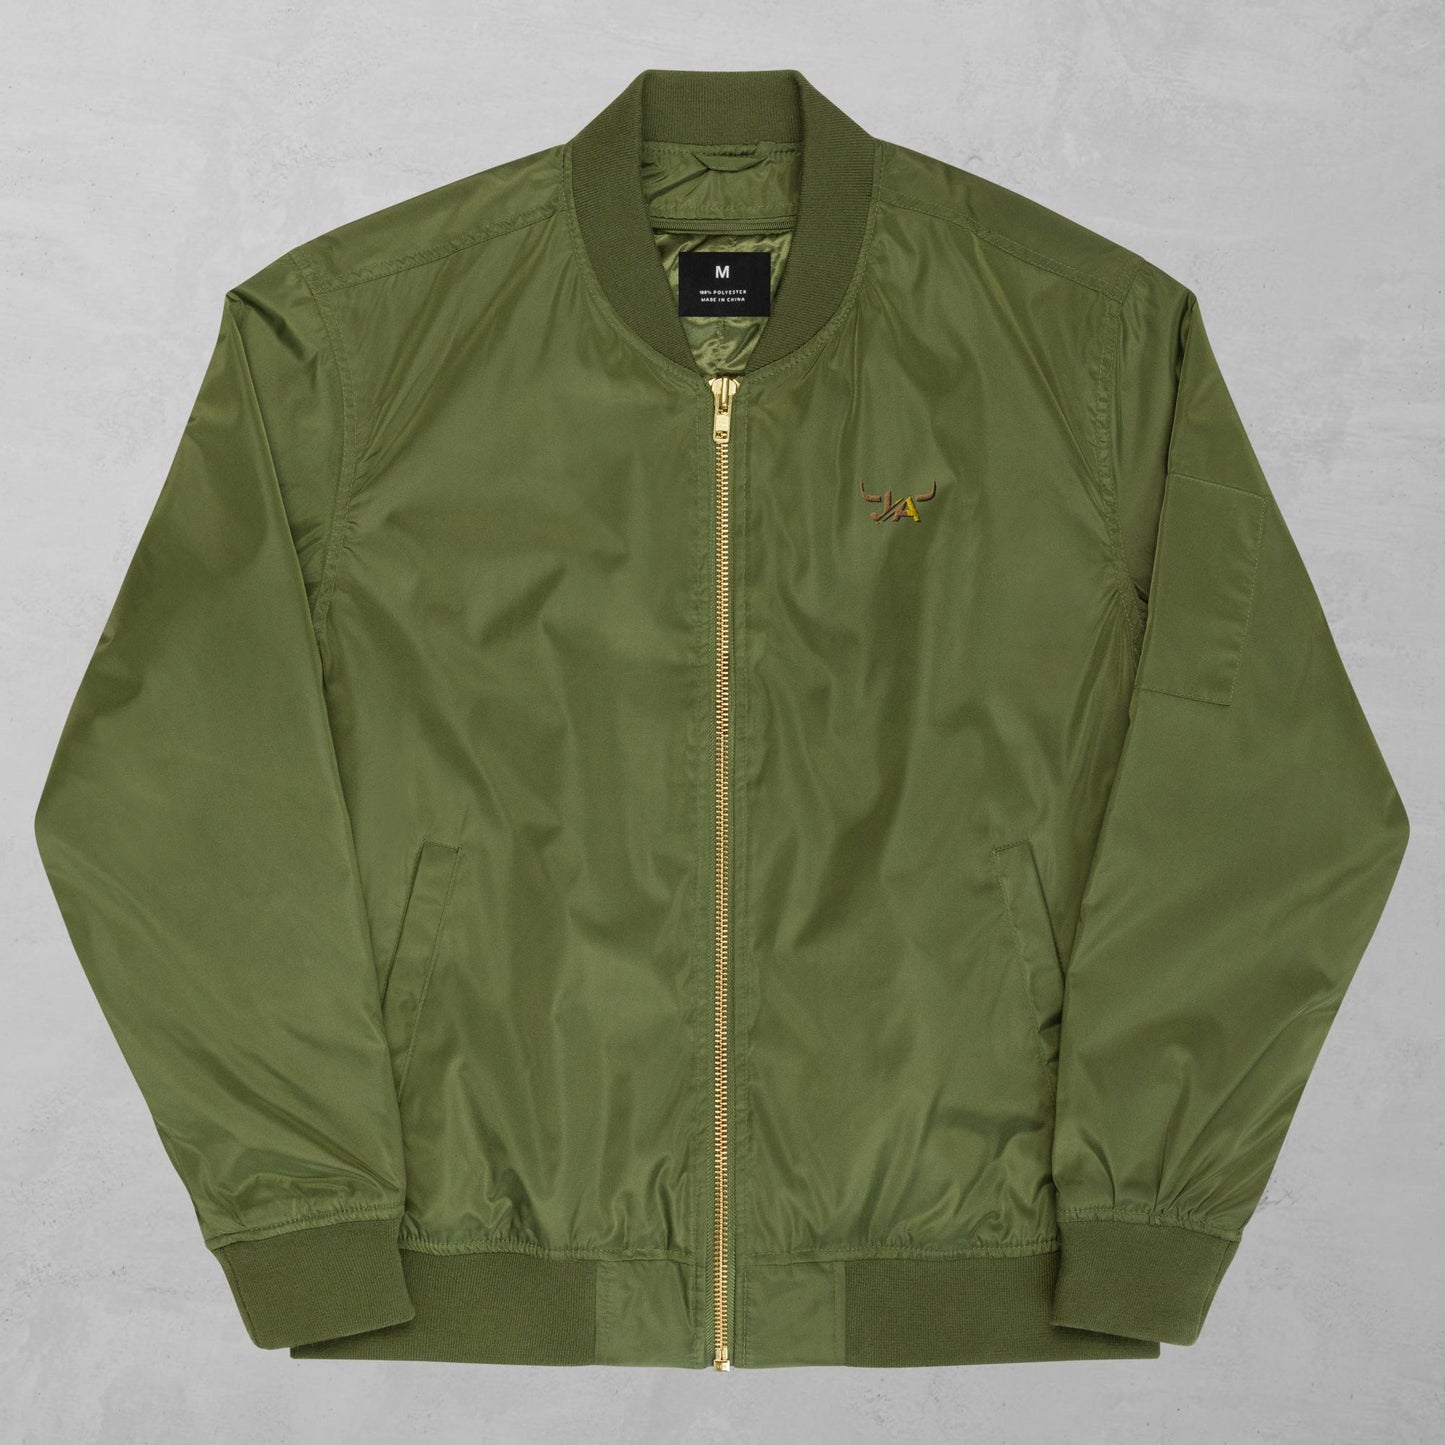 J.A Women's Premium recycled bomber jacket